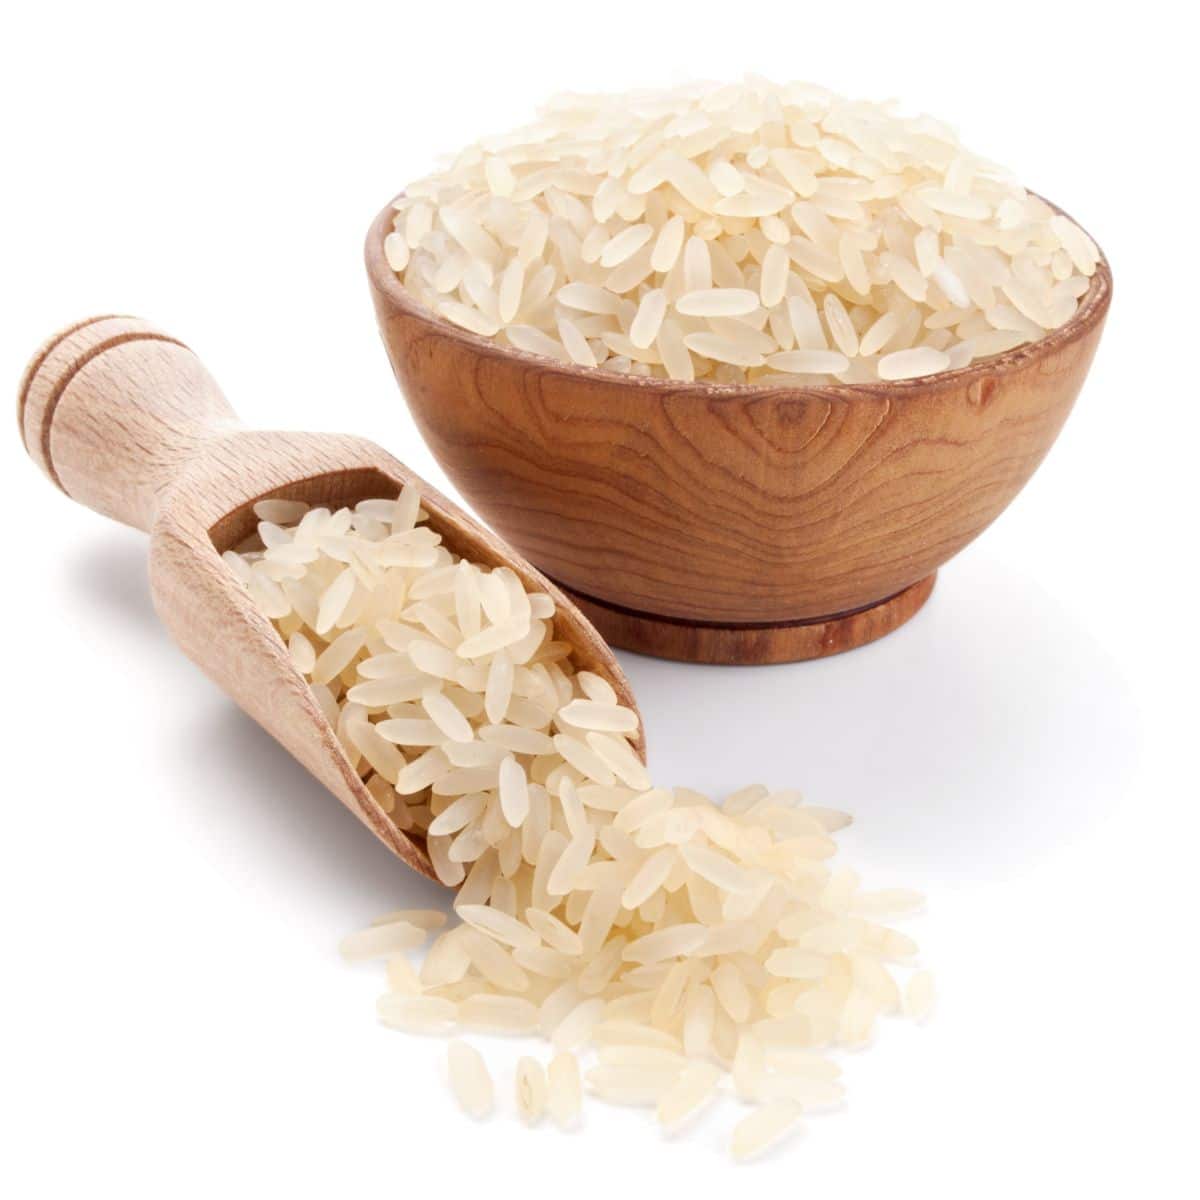 California blonde rice in a wood bowl next to a wood spoon on a white background.